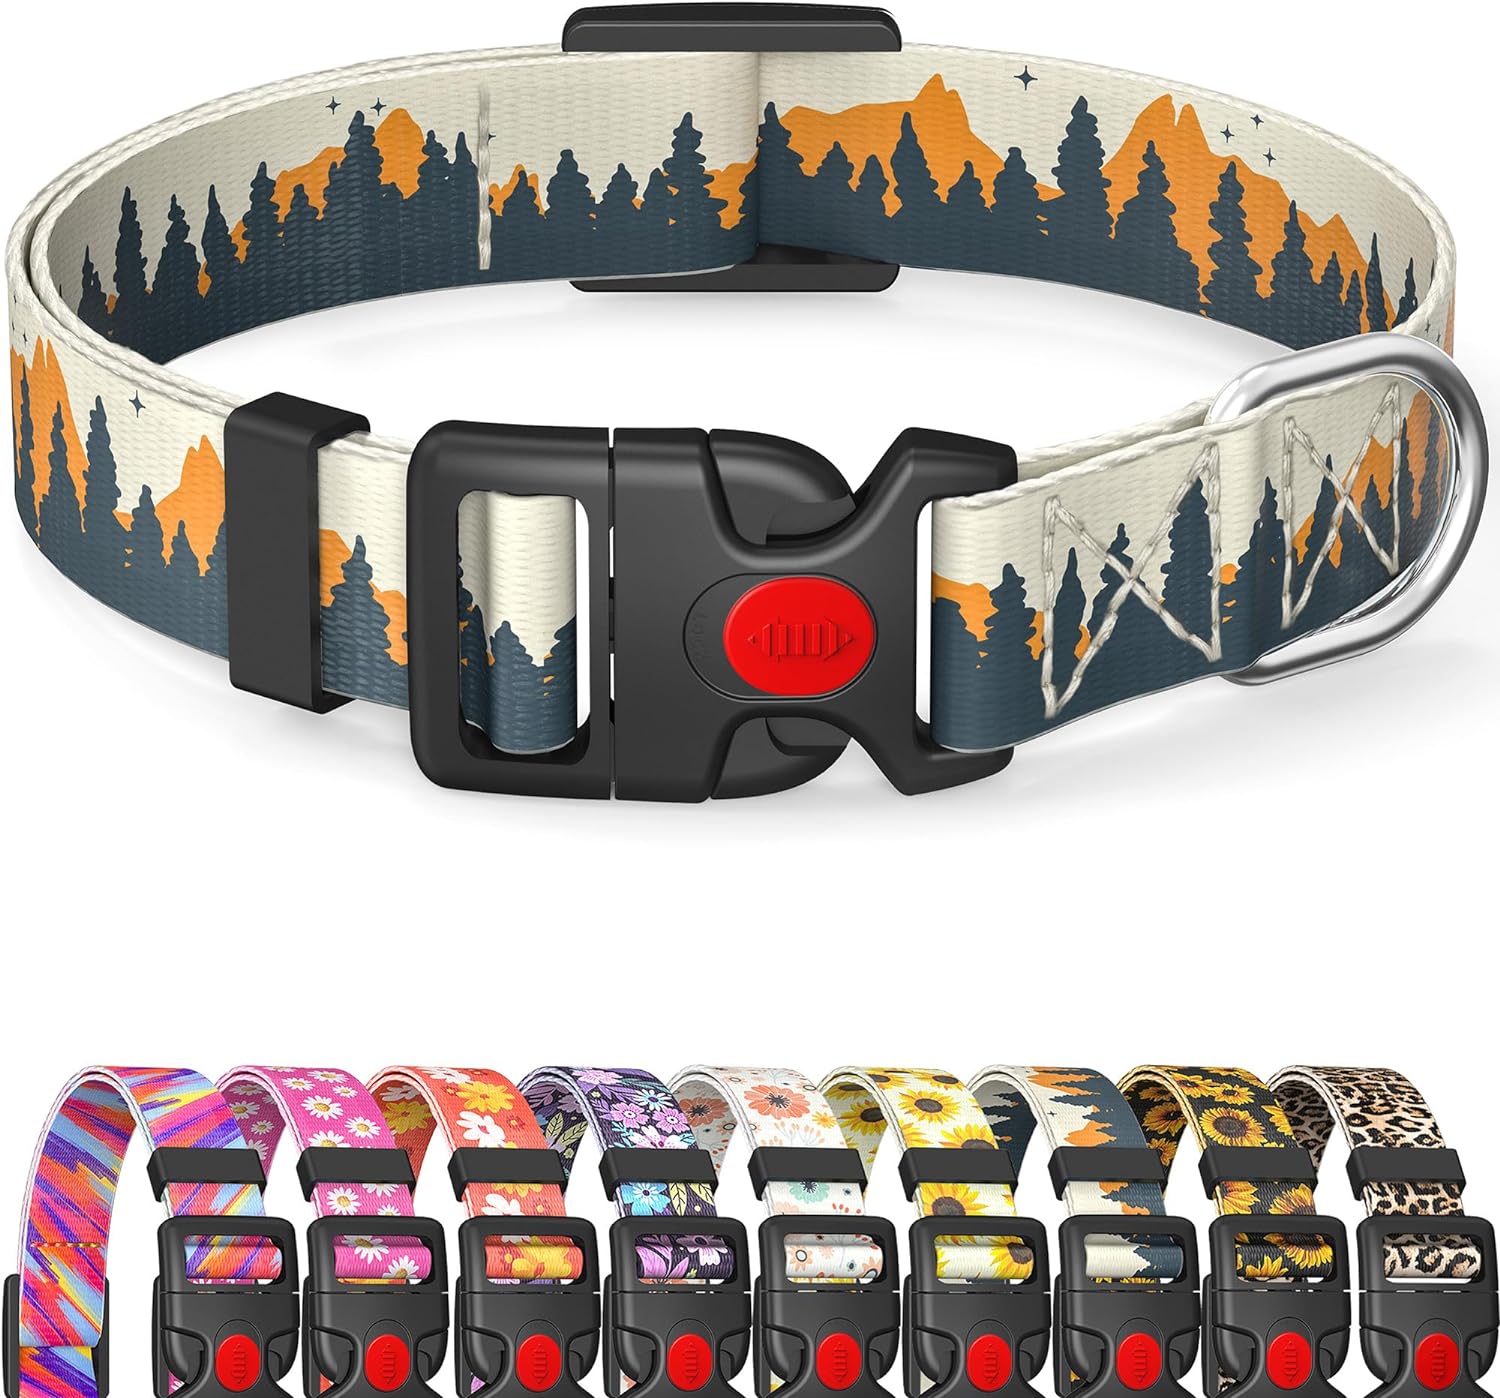 Grepad Special Design Patterns Dog Collars for Medium Dogs Girl Boy,Female Male Dog Collar for Puppy Extra Small Large Dogs,Durable Soft Dog Collar with Quick Release Safety Buckle,Sunset Forest,M